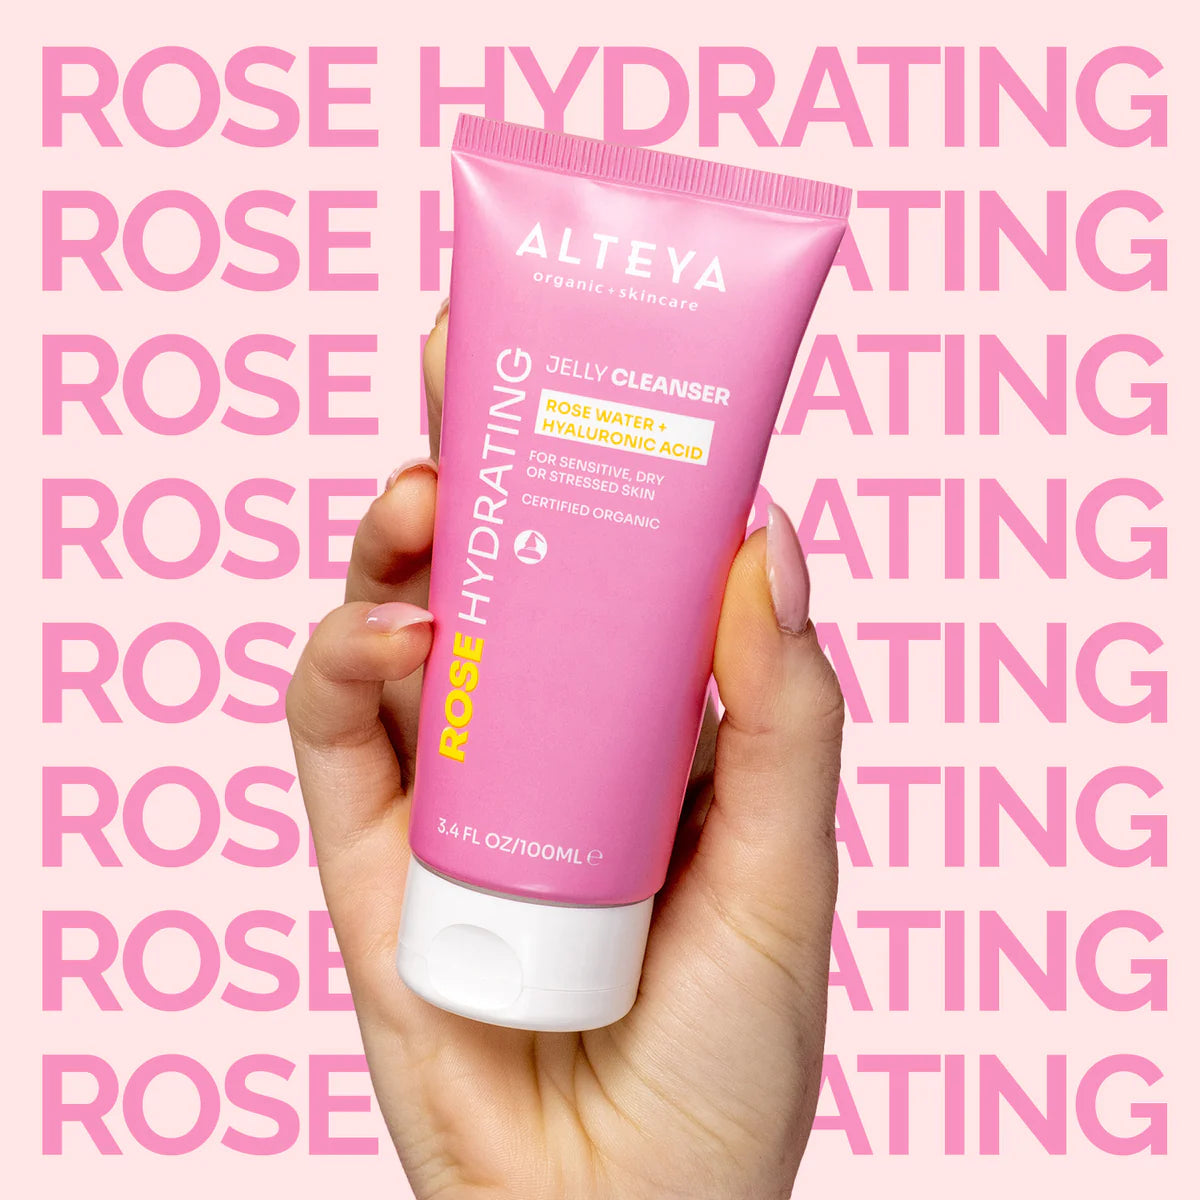 A woman holding a tube of Alteya Organics Rose Hydrating Jelly Cleanser.